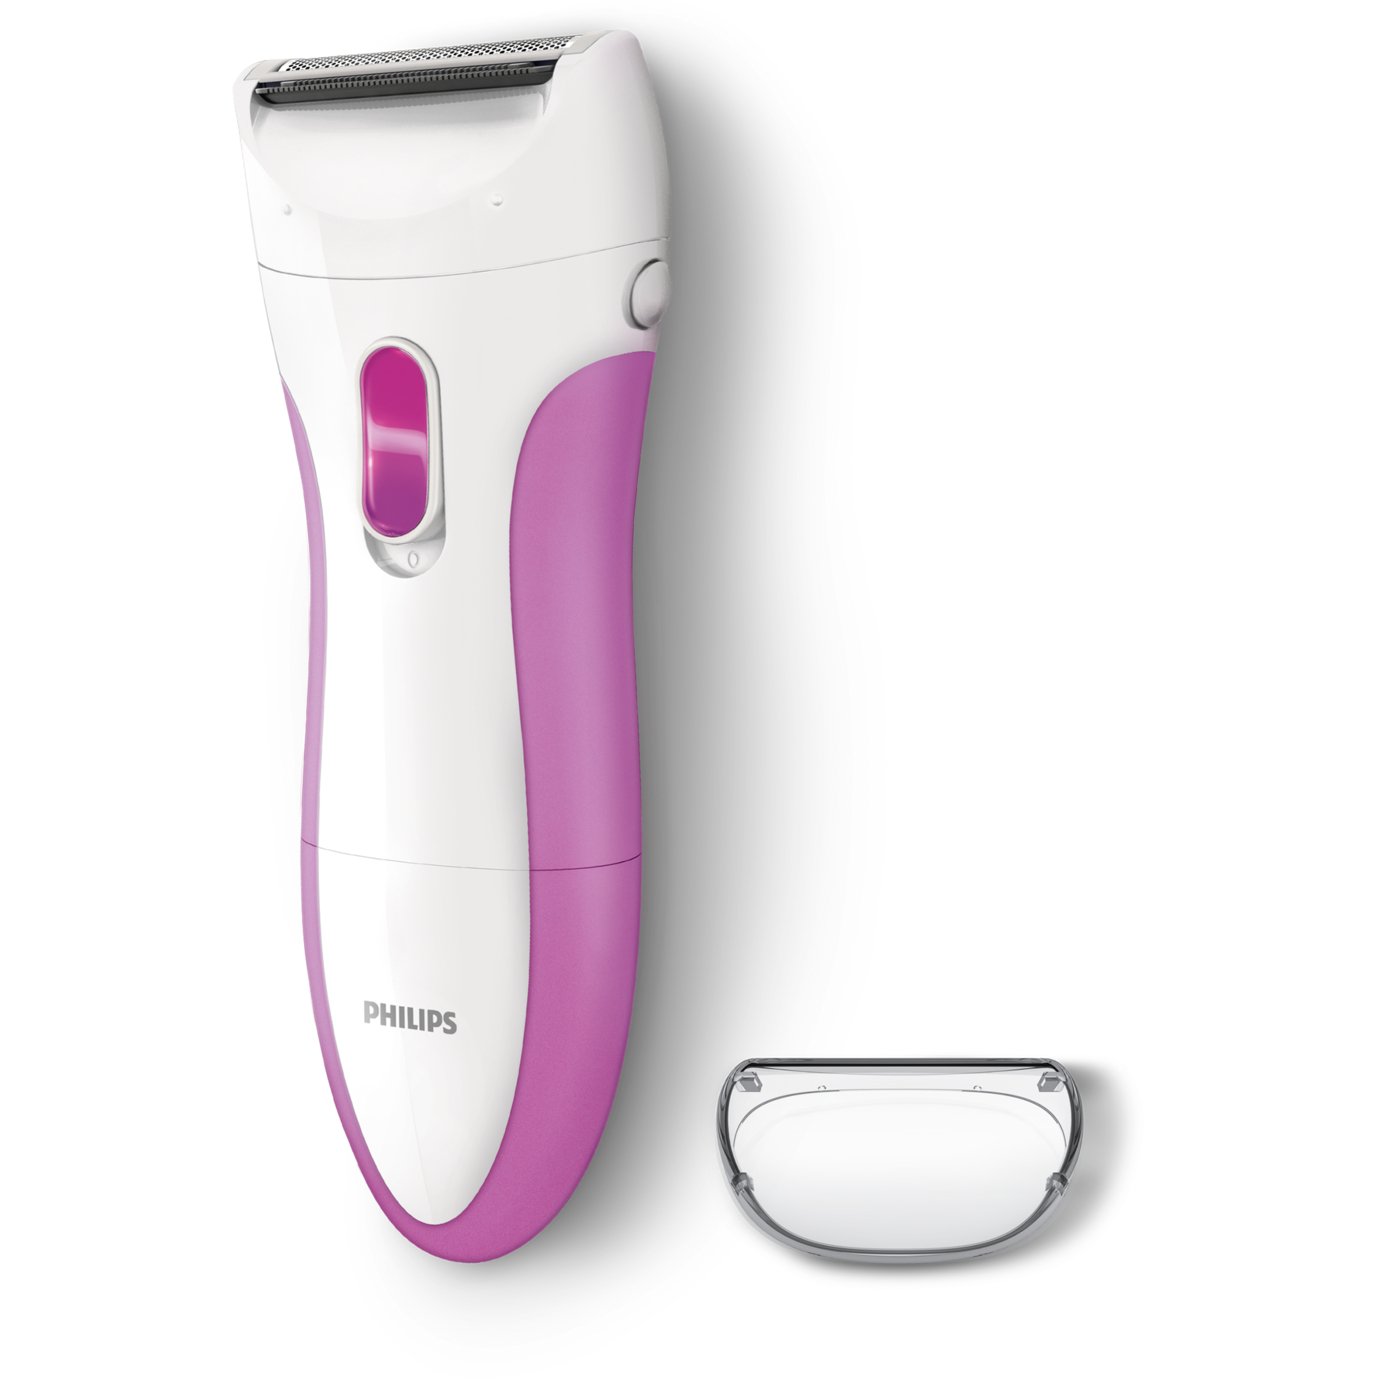 Phillips Wet and Dry Cordless Lady Shaver review